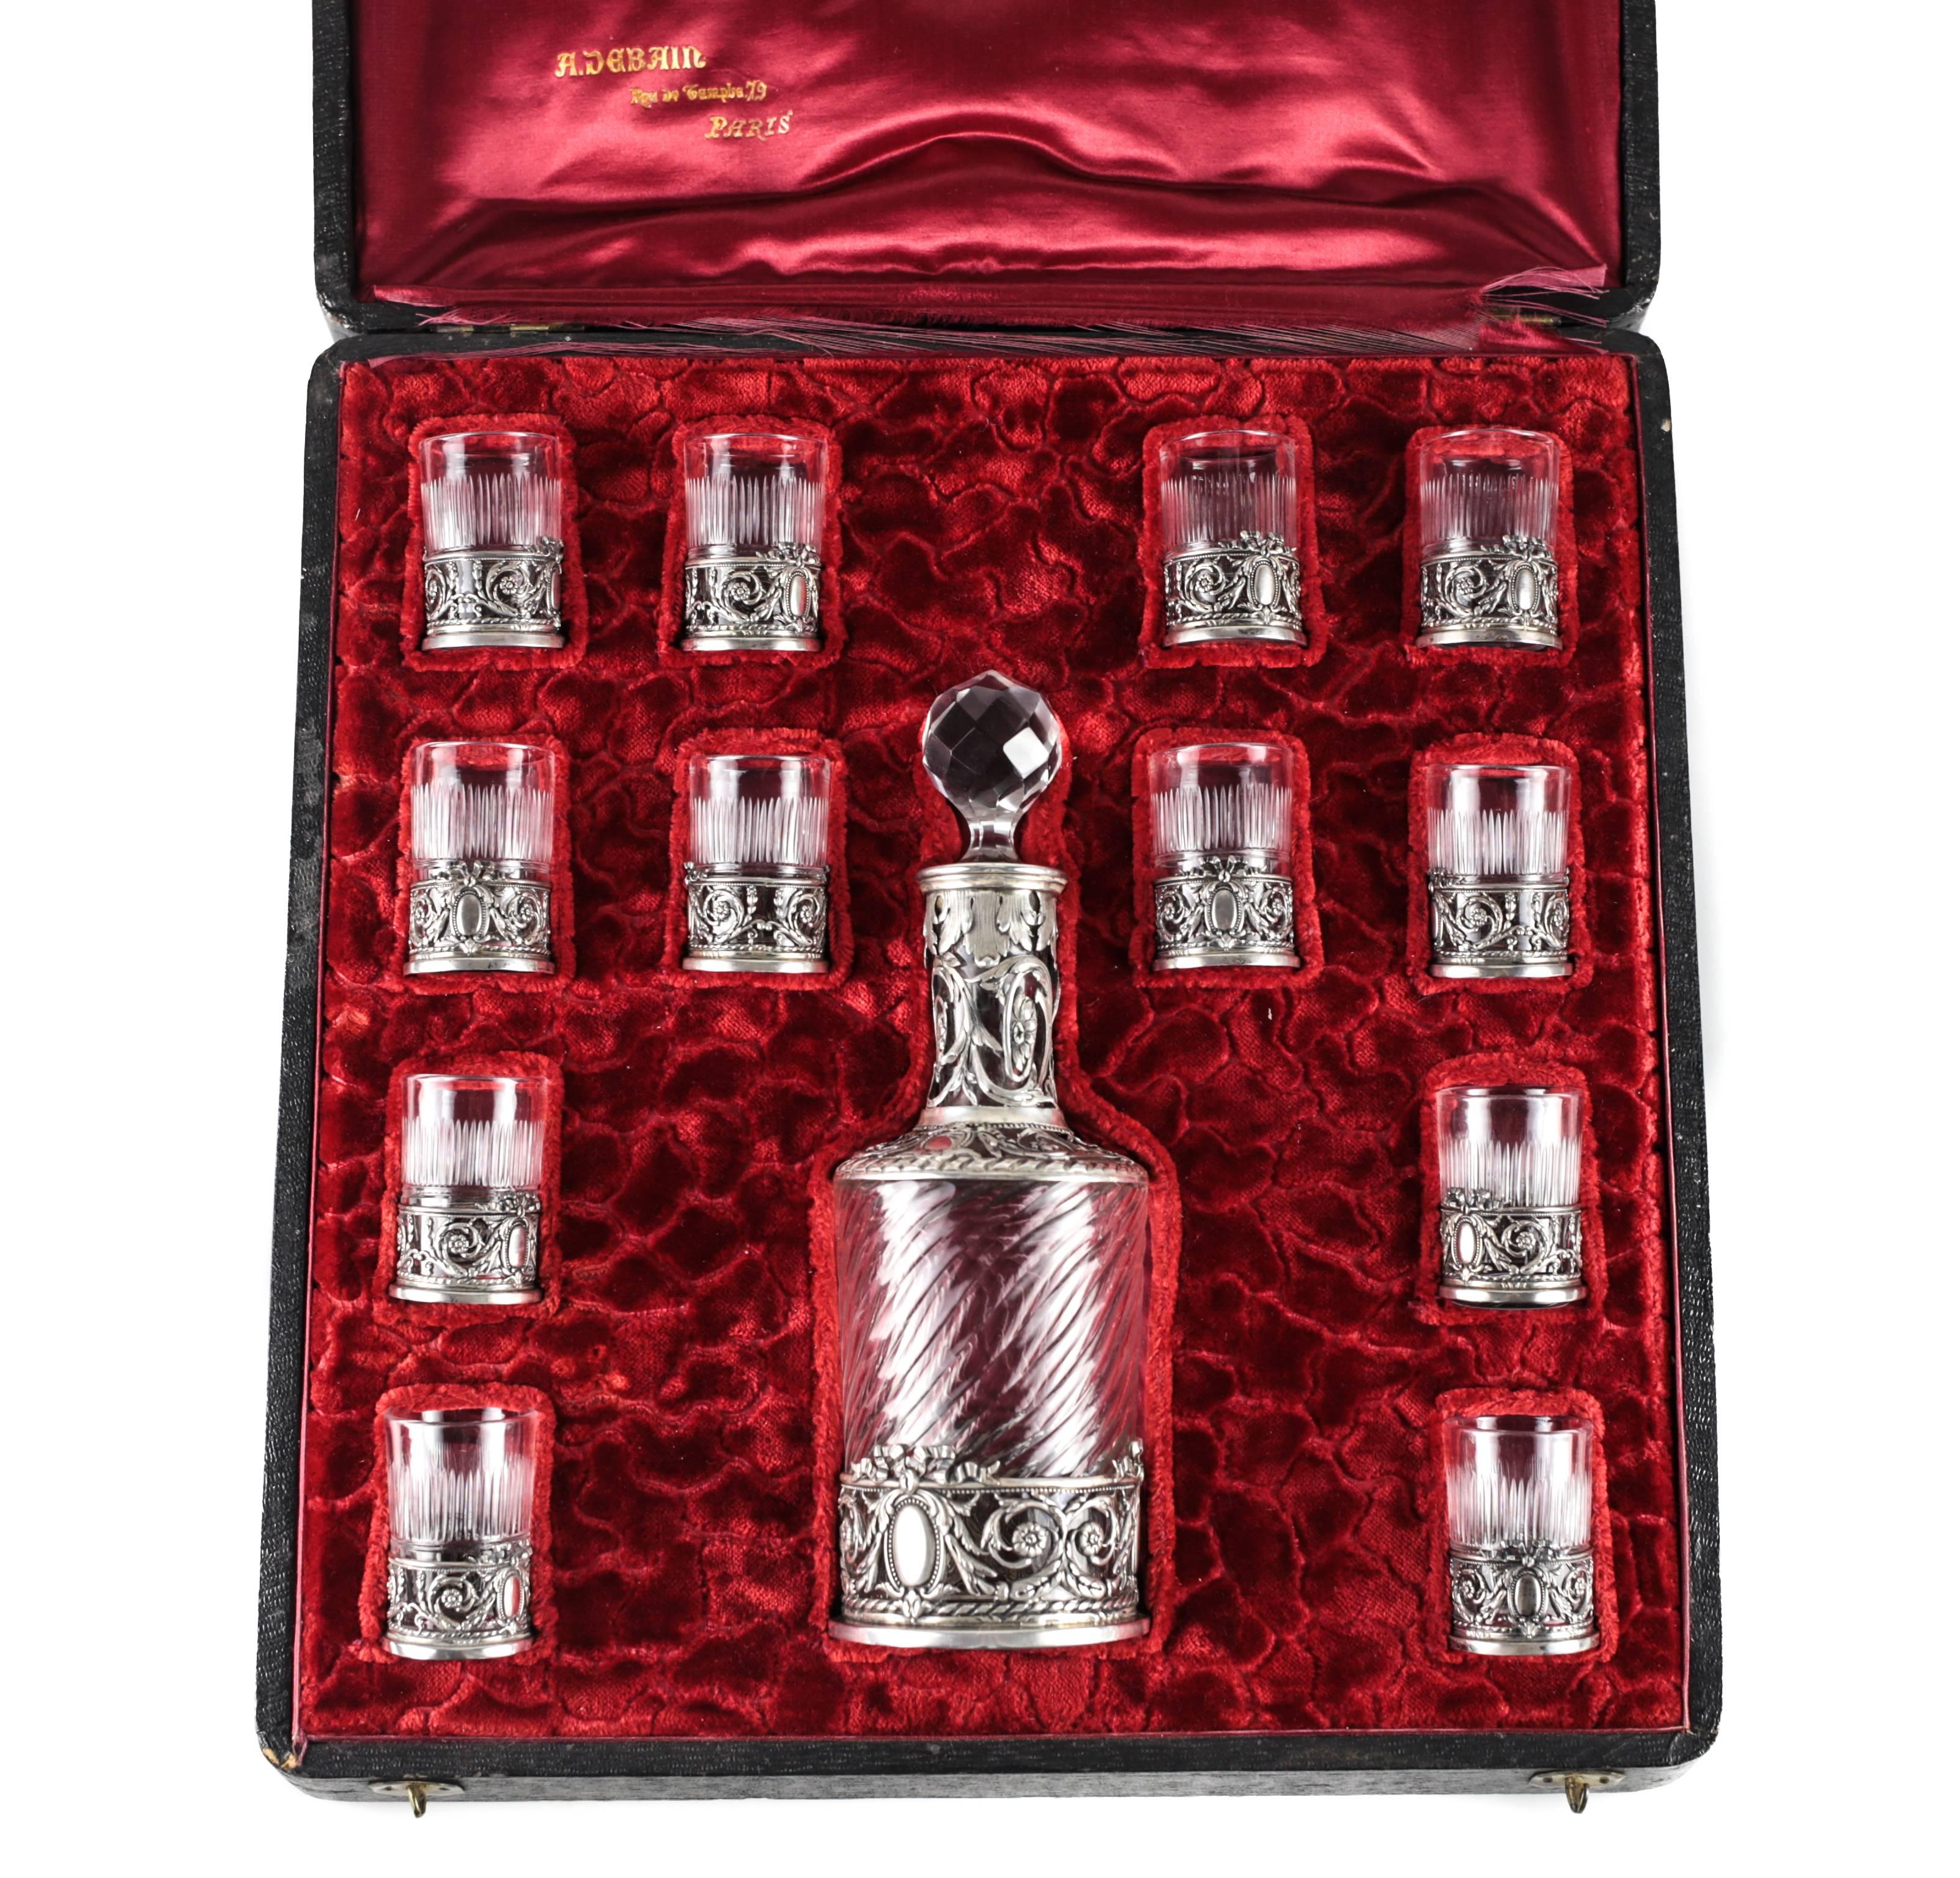 A wonderful cased set of 12 solid silver mounted liquor drinking glasses with matching decanter. The set has incredible hand chased details to the silver with floral vines and sprays, etched fluting to the glasses.

A stunning leather lined wooden